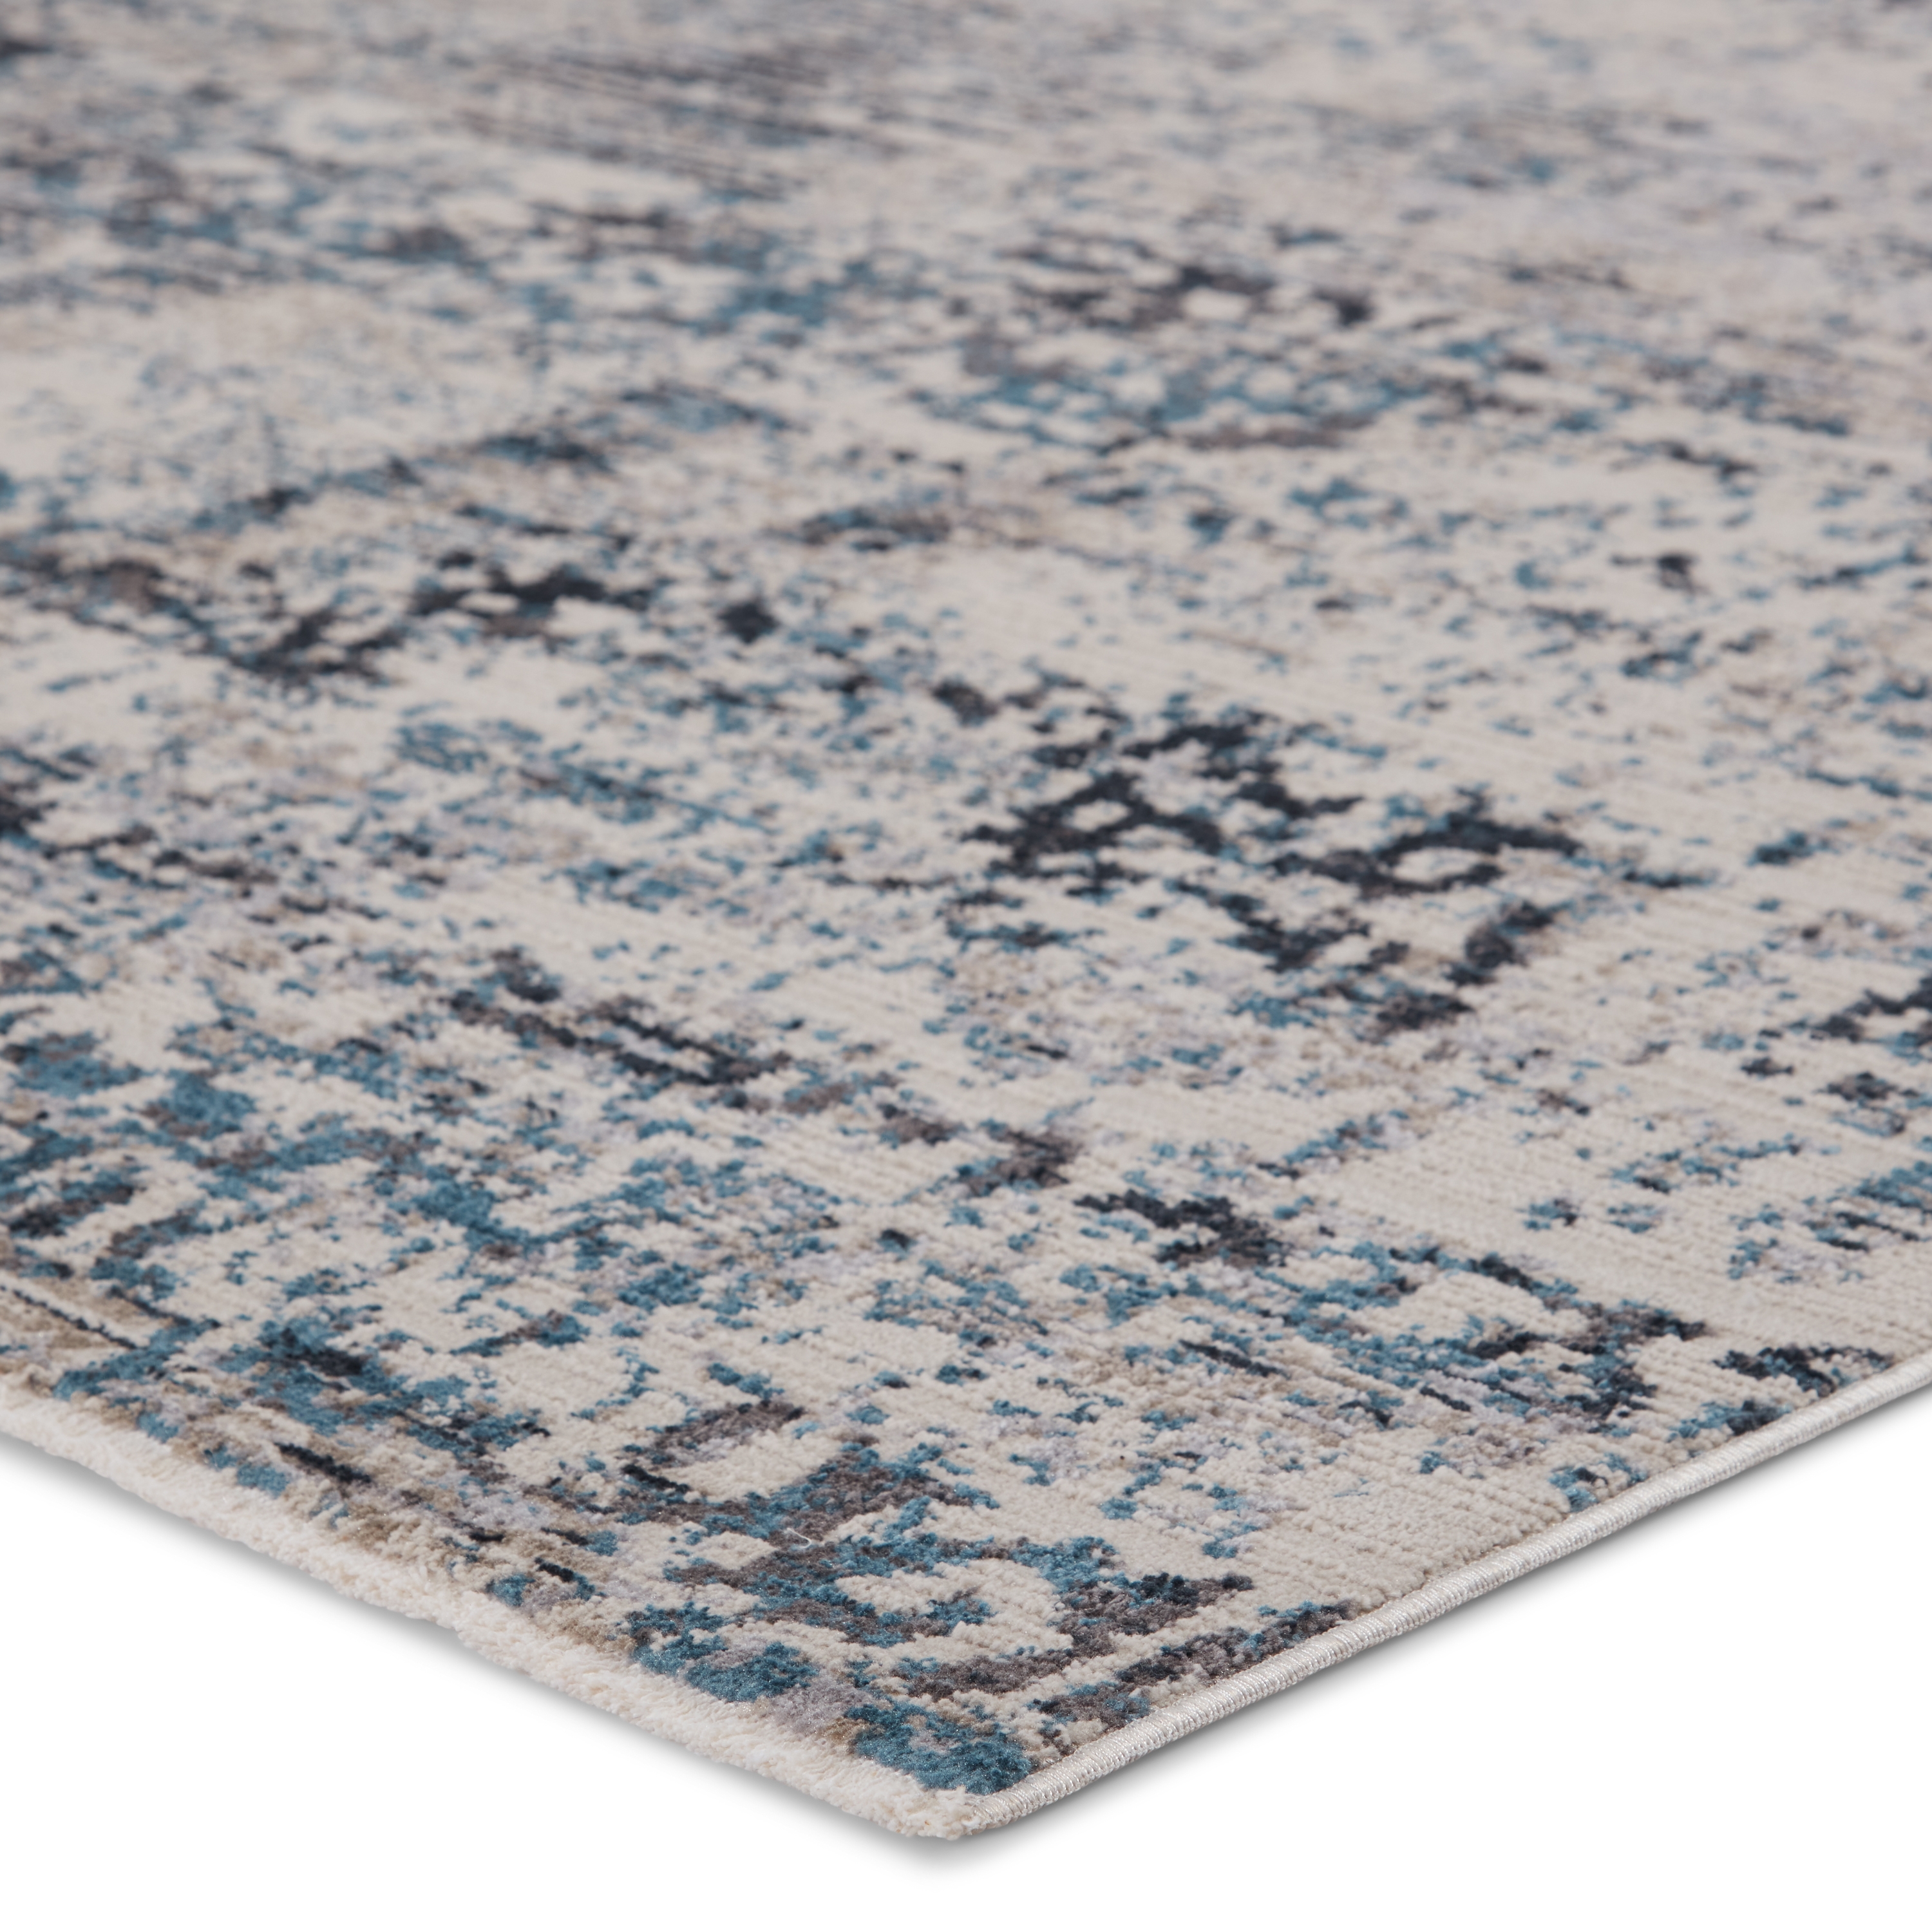 Vibe by Halston Abstract Gray/ Blue Area Rug (7'10"X10'10") - Image 1